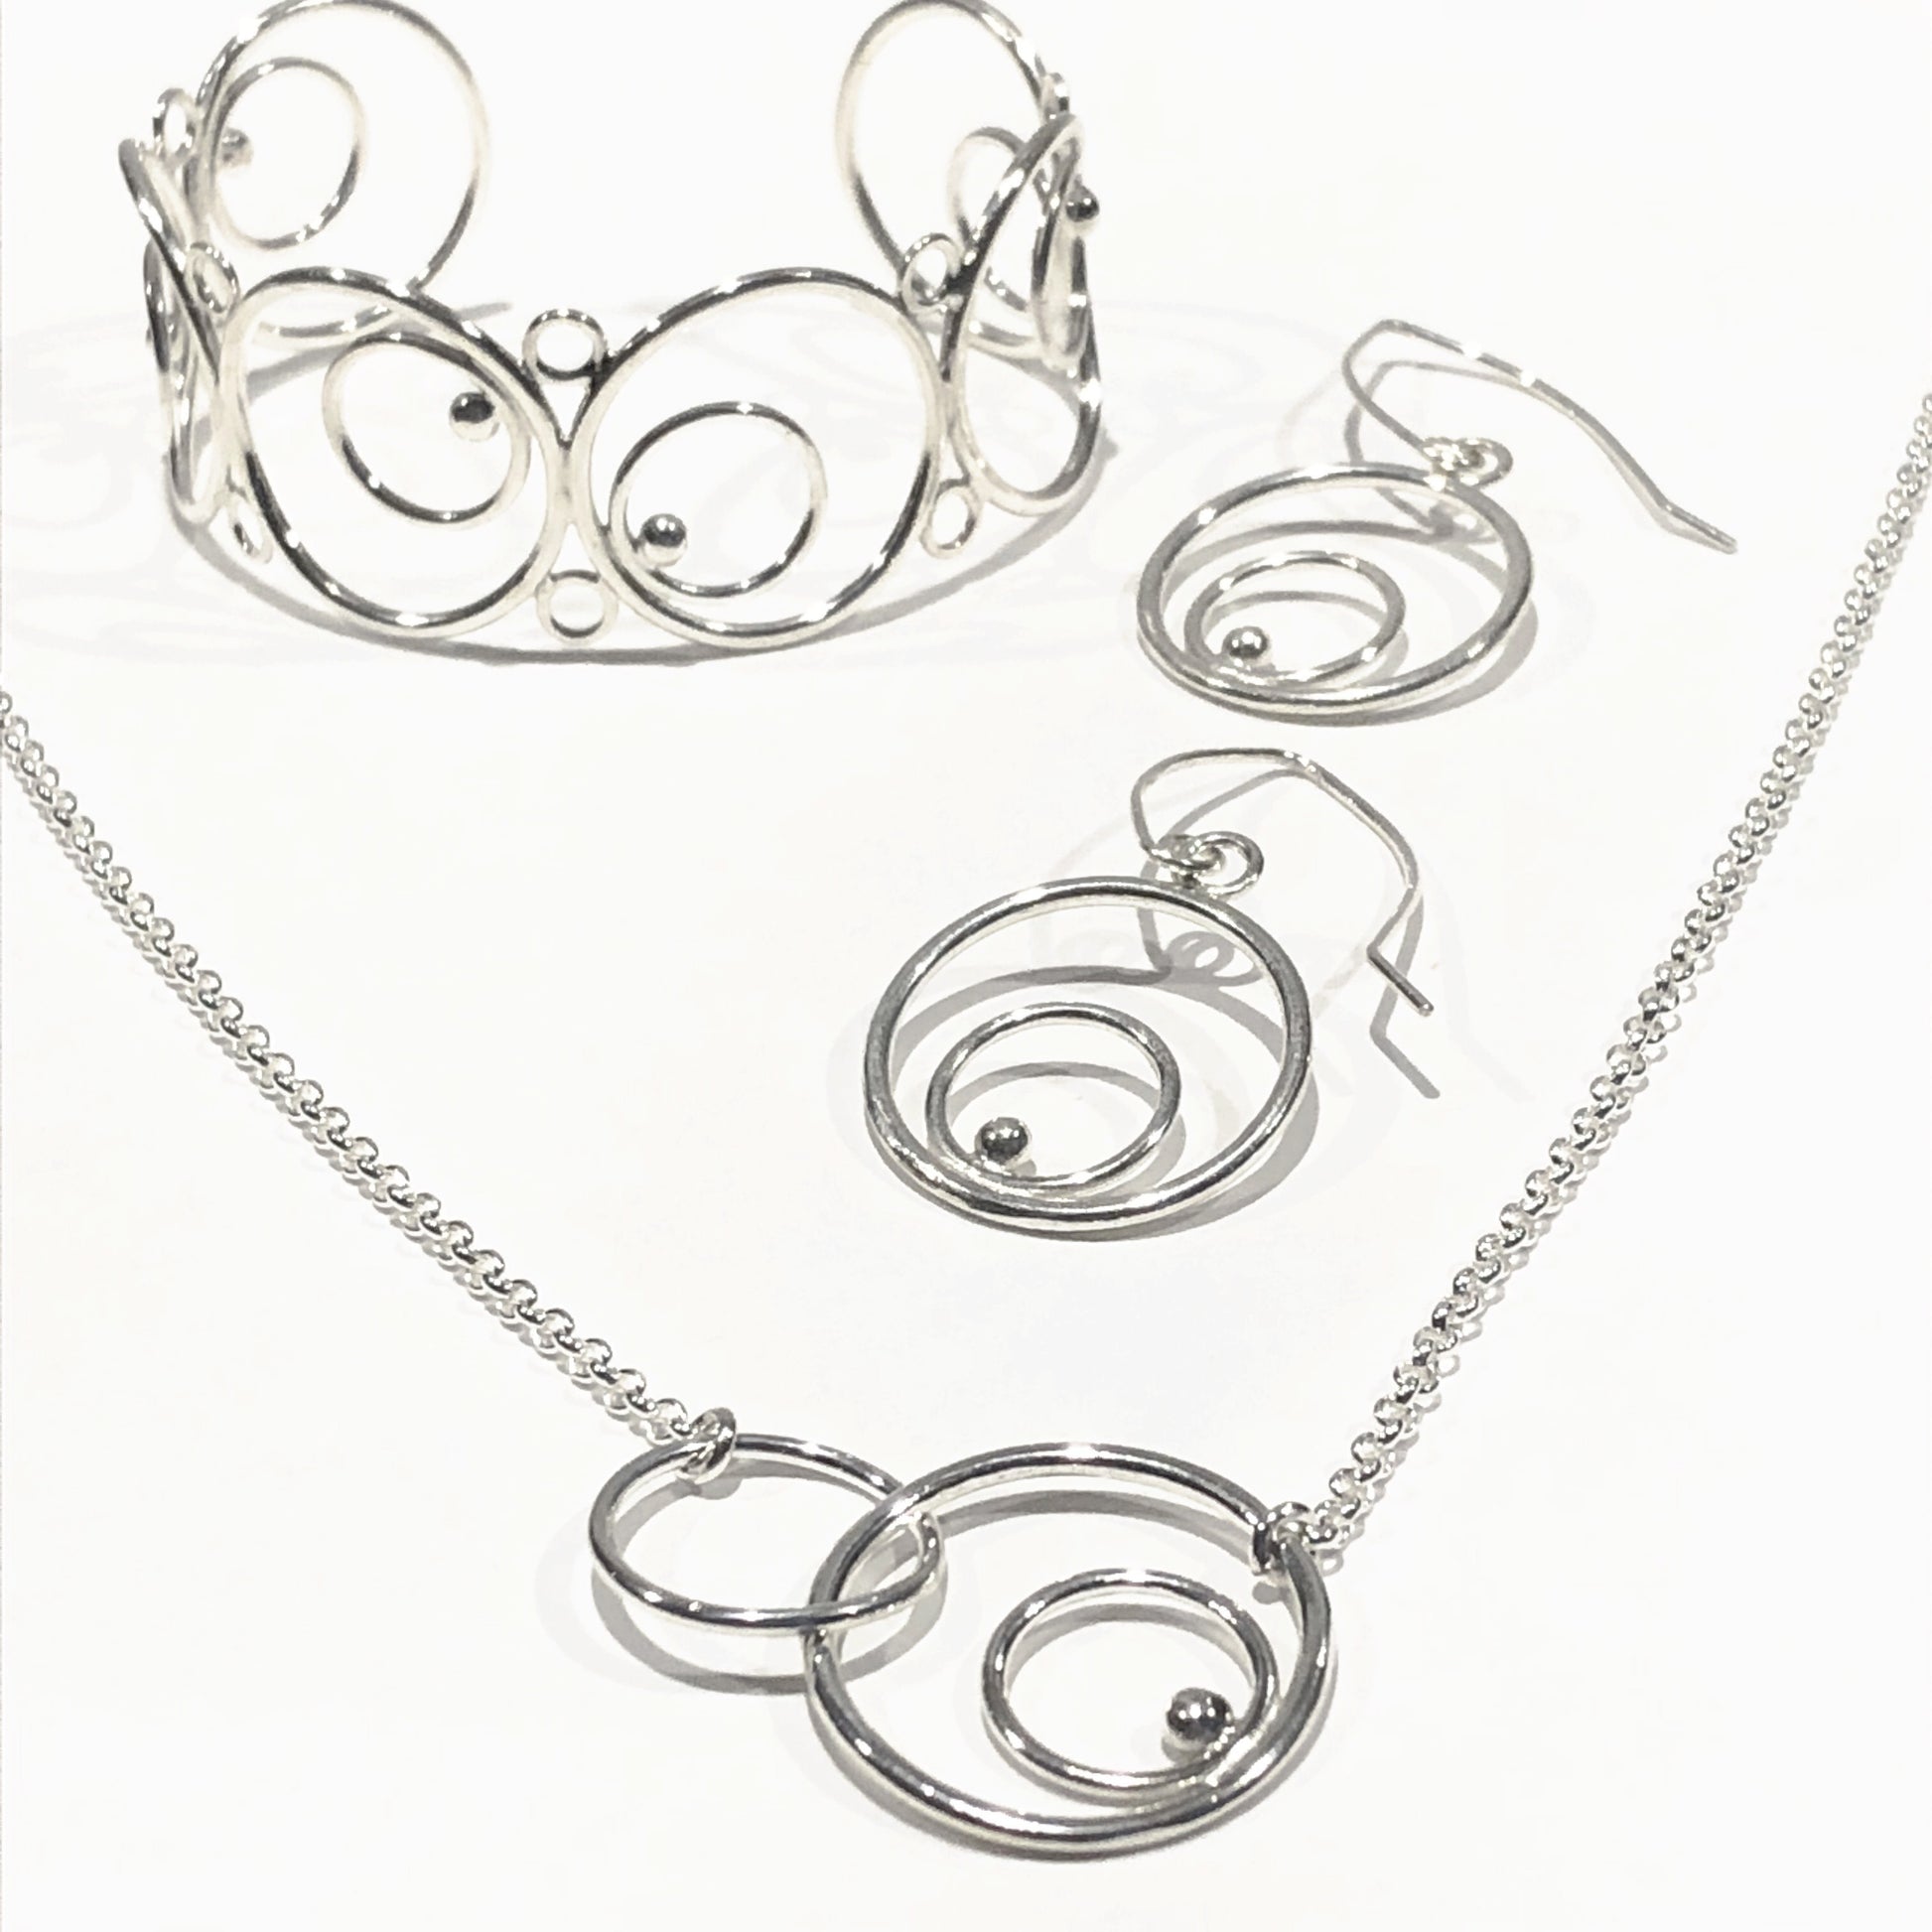 Linked circles necklace with bracelet and earrings